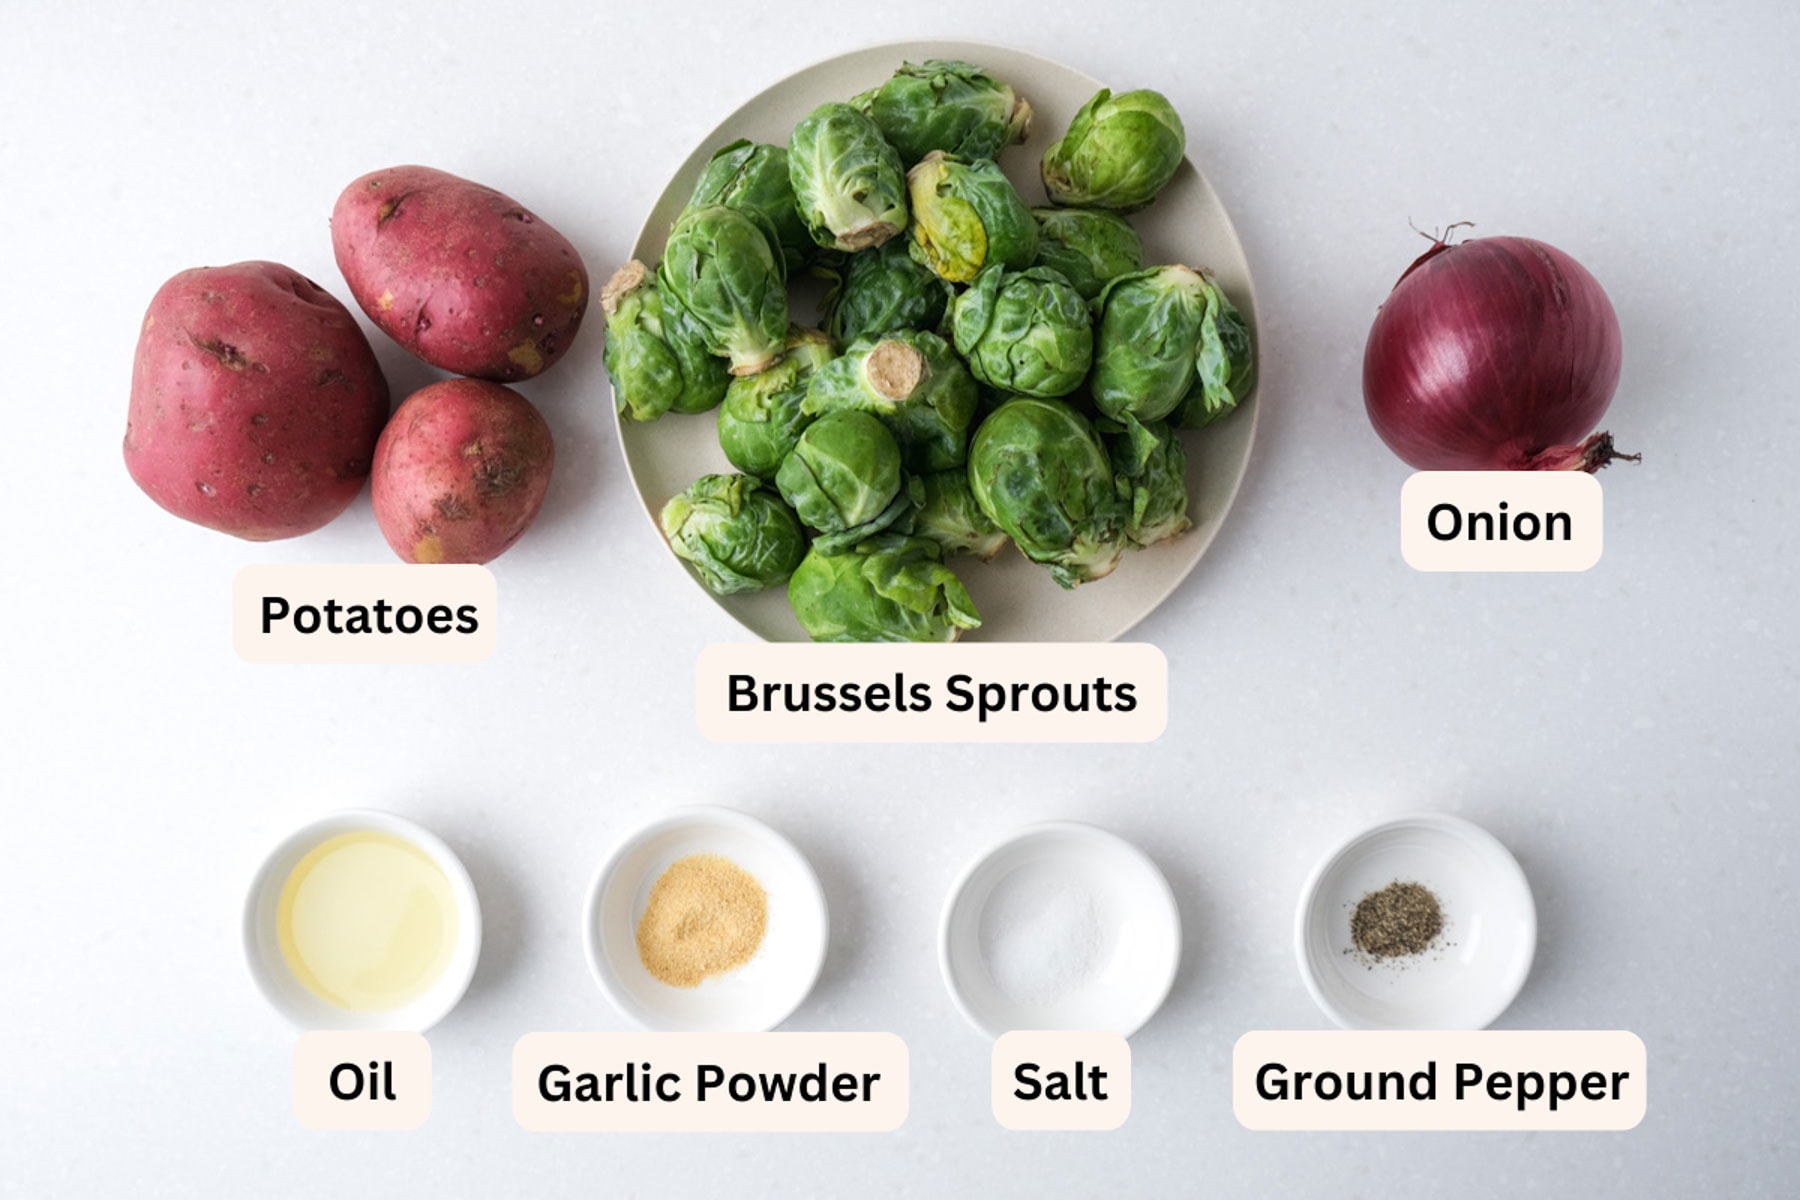 ingredients for brussels sprouts and potatoes in white dishes on counter top with labels.